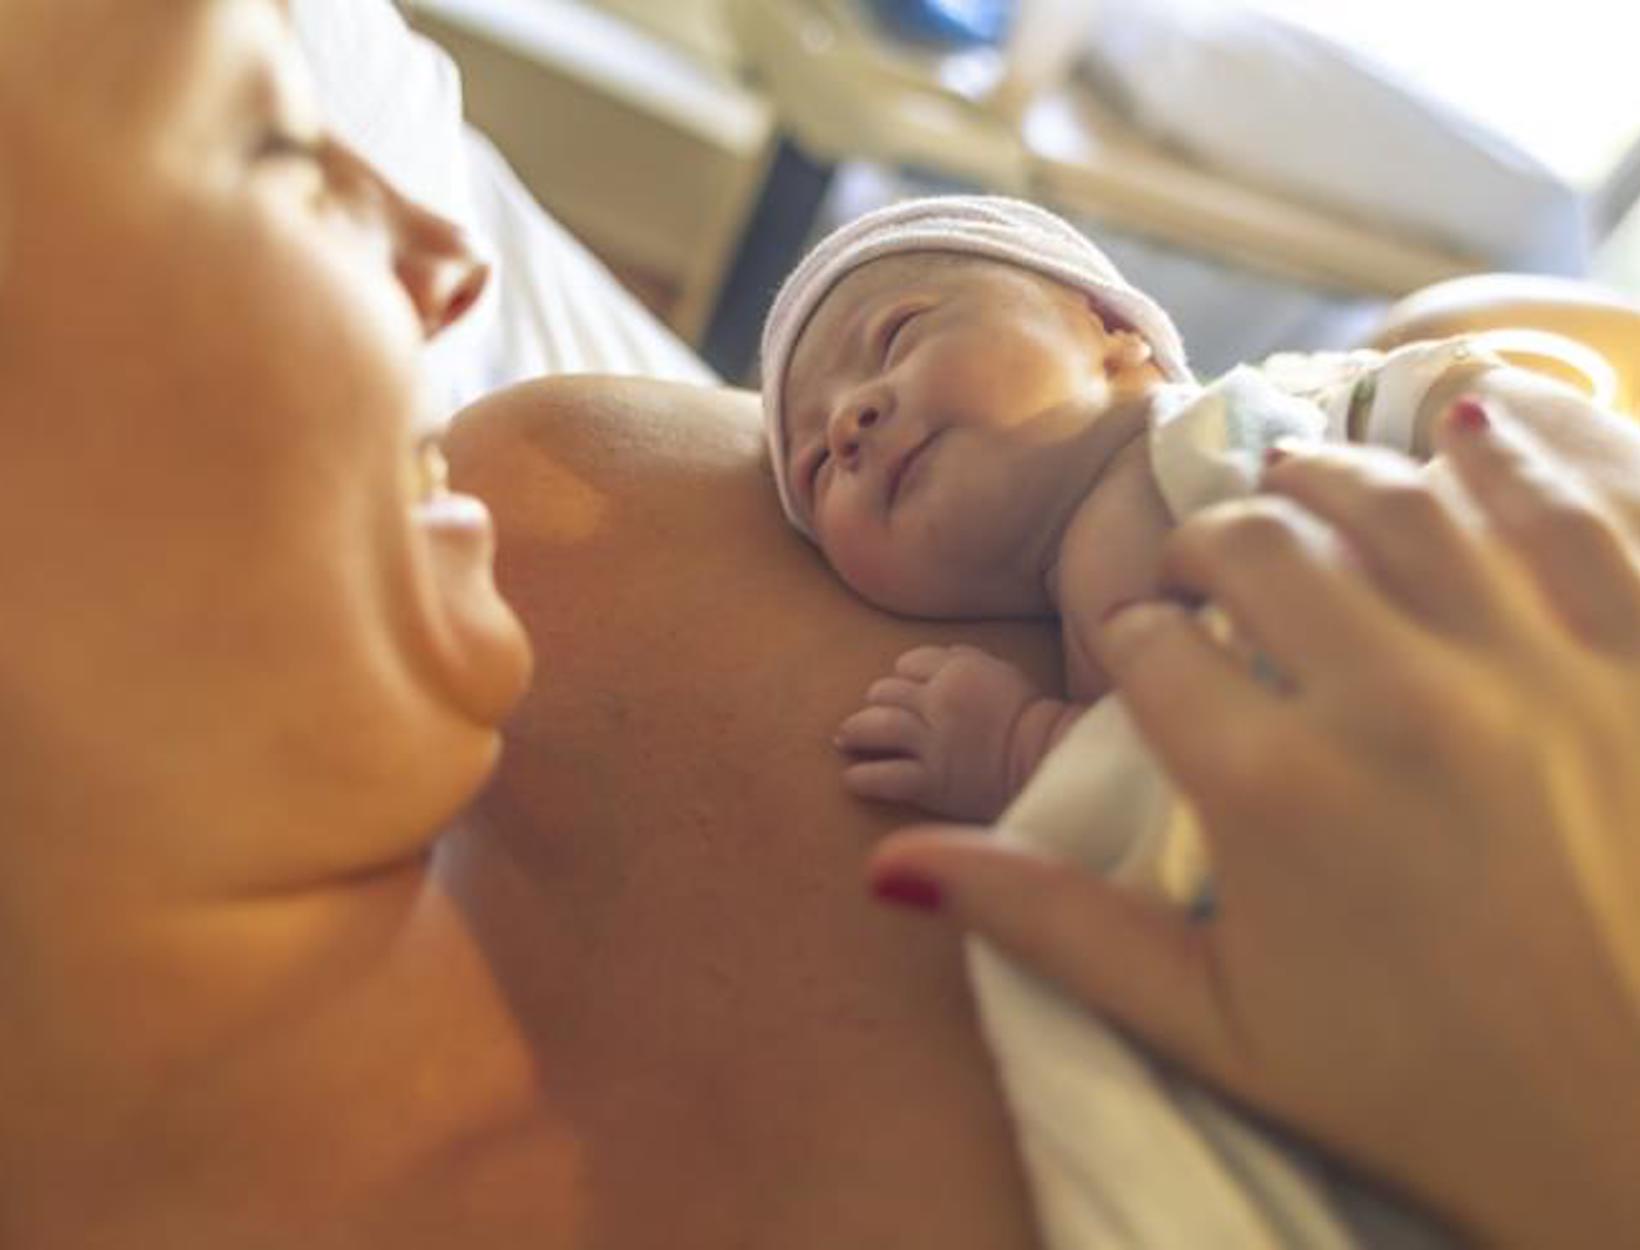 Not Bathing a Newborn Just after Birth Linked to Better Breastfeeding